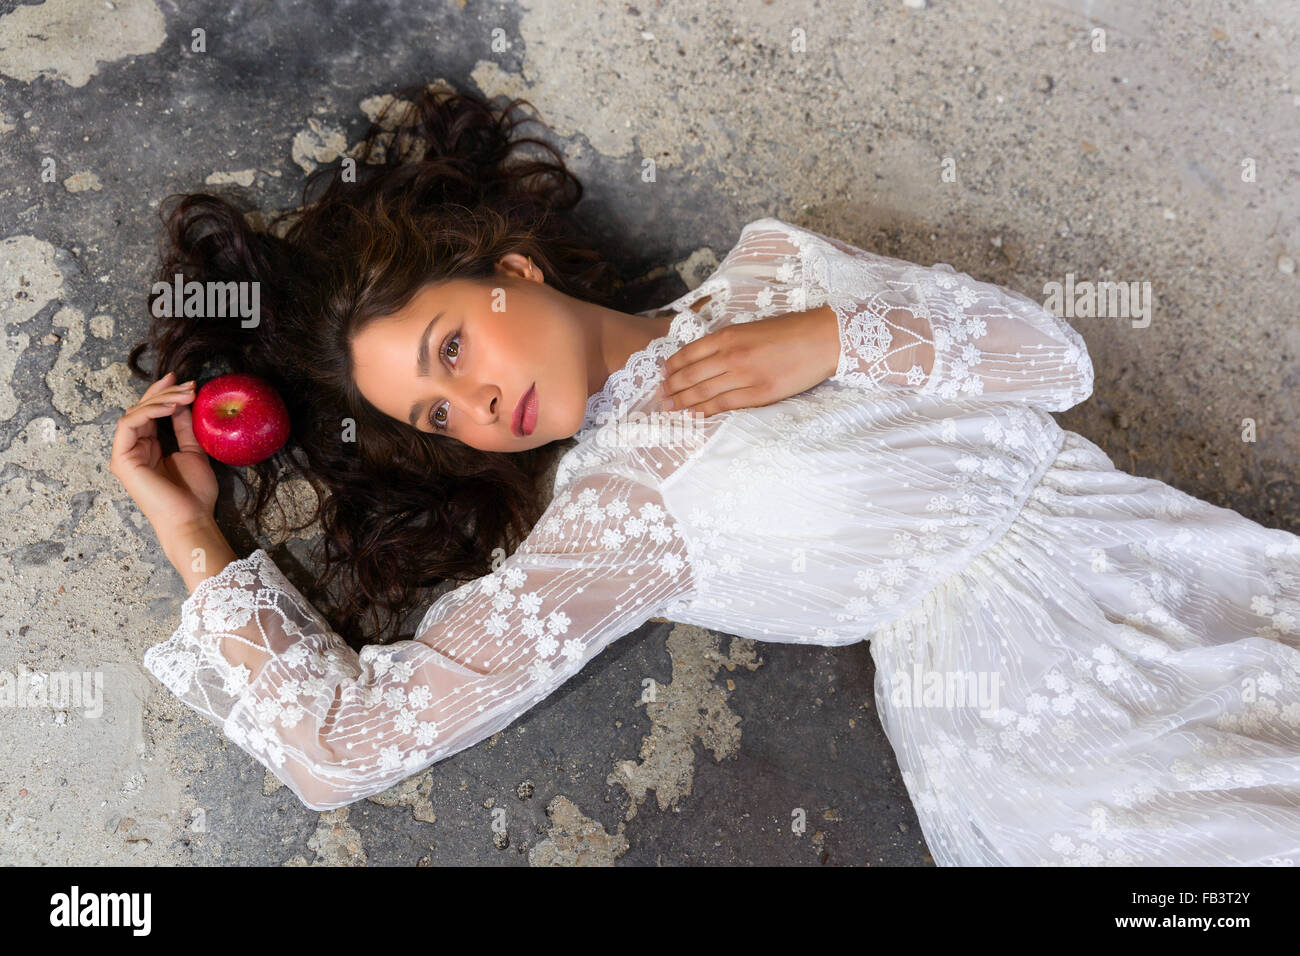 Stunning young woman in white lace dress lying on the floor with a red apple Stock Photo